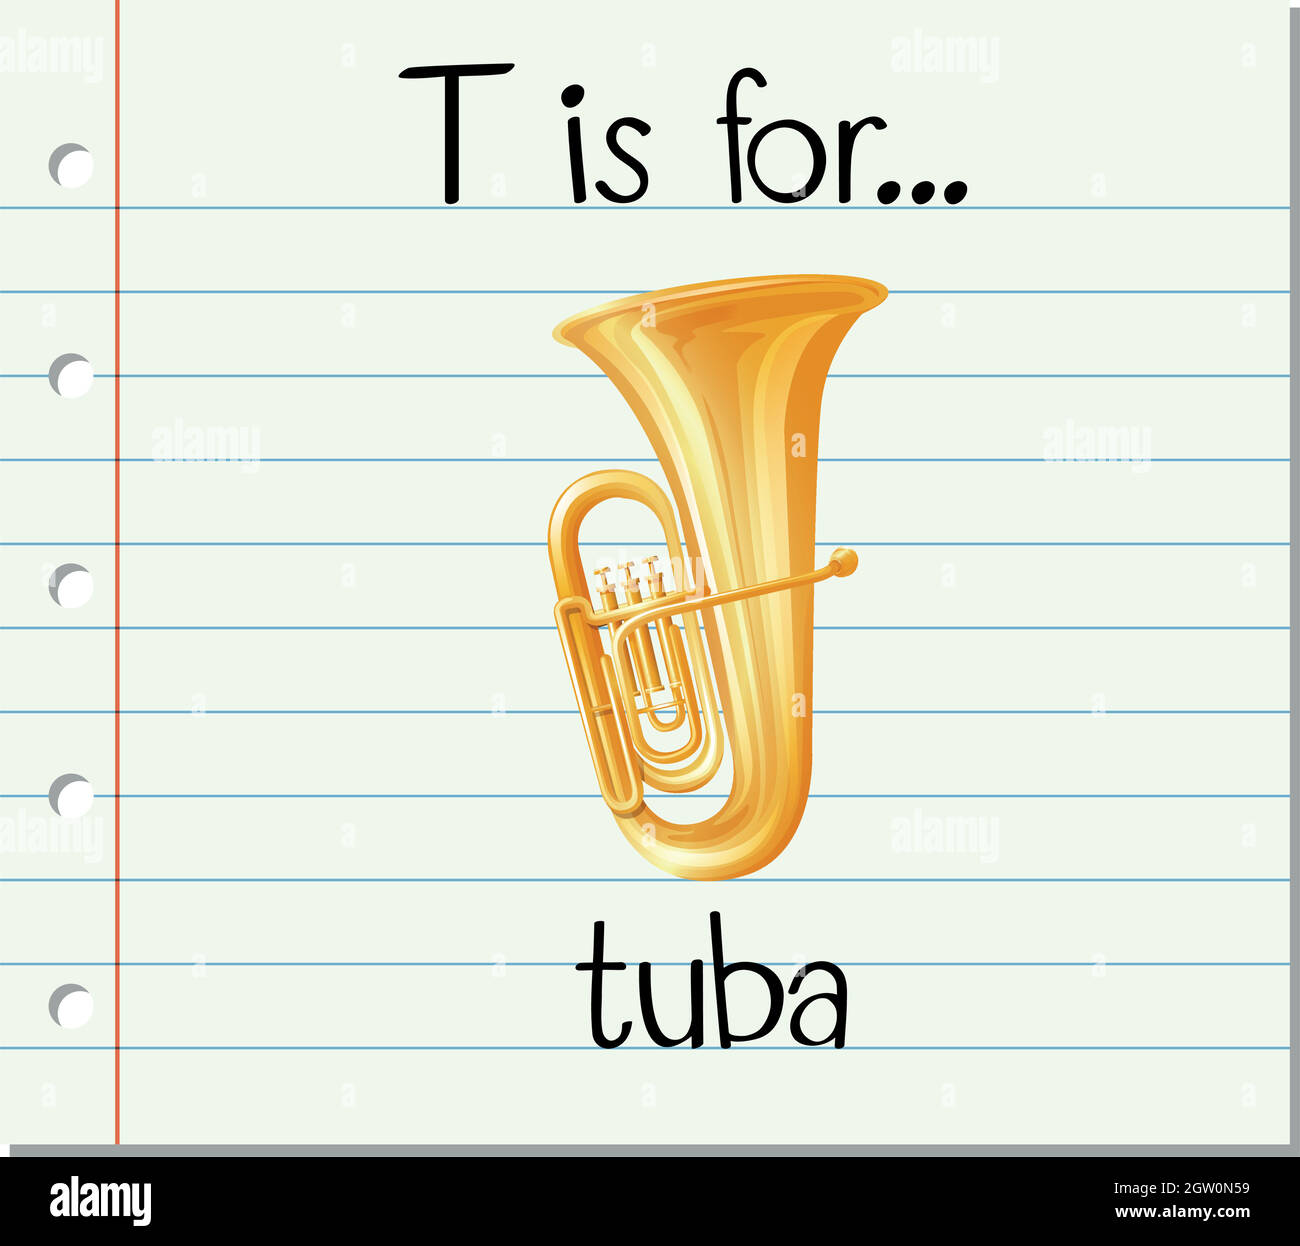 Flashcard letter T is for tuba Stock Vector